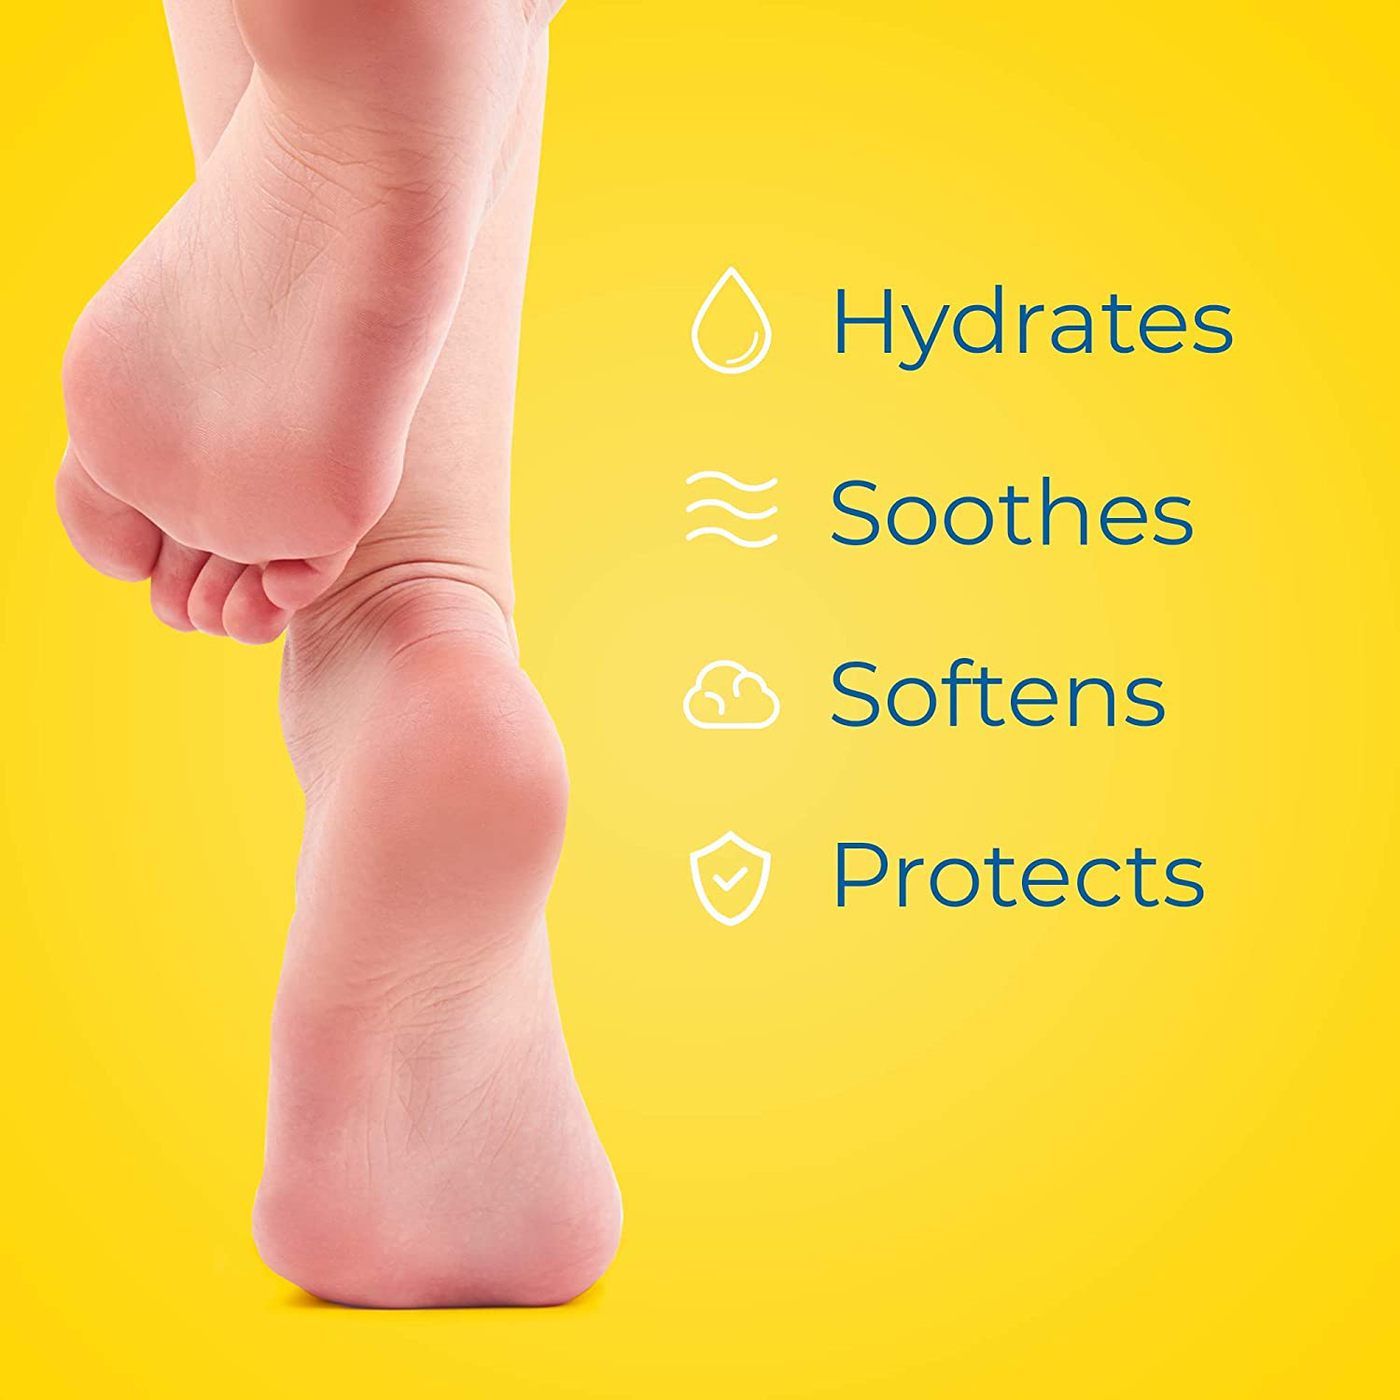 Dr. Scholl's Ultra Hydrating Foot Cream 3.5 oz, Lotion with 25% Urea for Dry Cracked Feet, Heals and Moisturizes for Healthy Feet